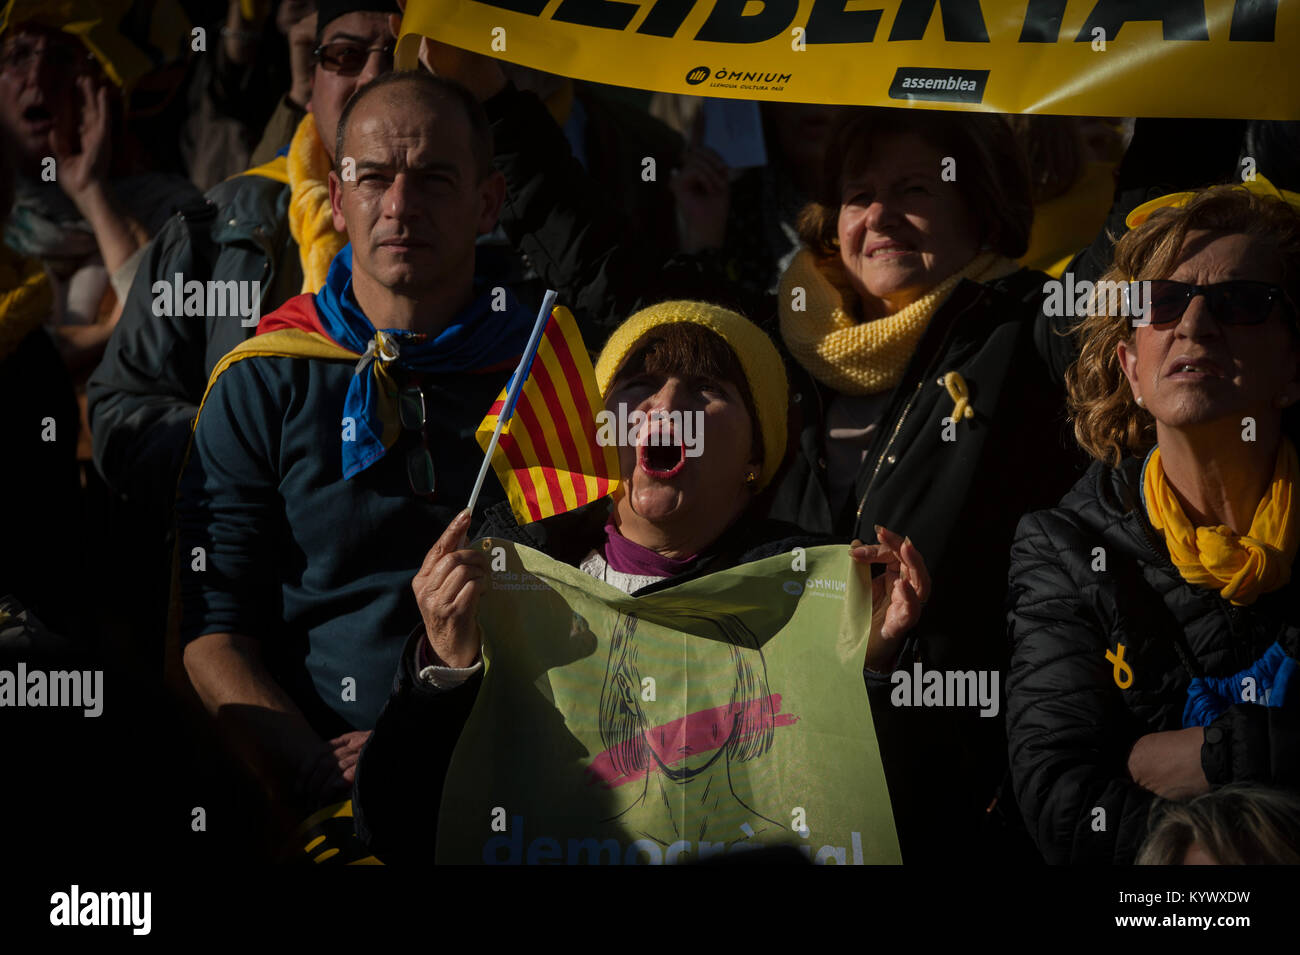 Barcelona, Spain. 17th January, 2018. People gather outside the Catalan parliament during a parliamentary session in Barcelona. A new Catalan parliament meets after a failed attempt at secession last year and amid imminent questions about the role played by fugitive politicians and imprisoned in the separatist majority of the chamber. Credit: Charlie Perez/Alamy Live News Stock Photo